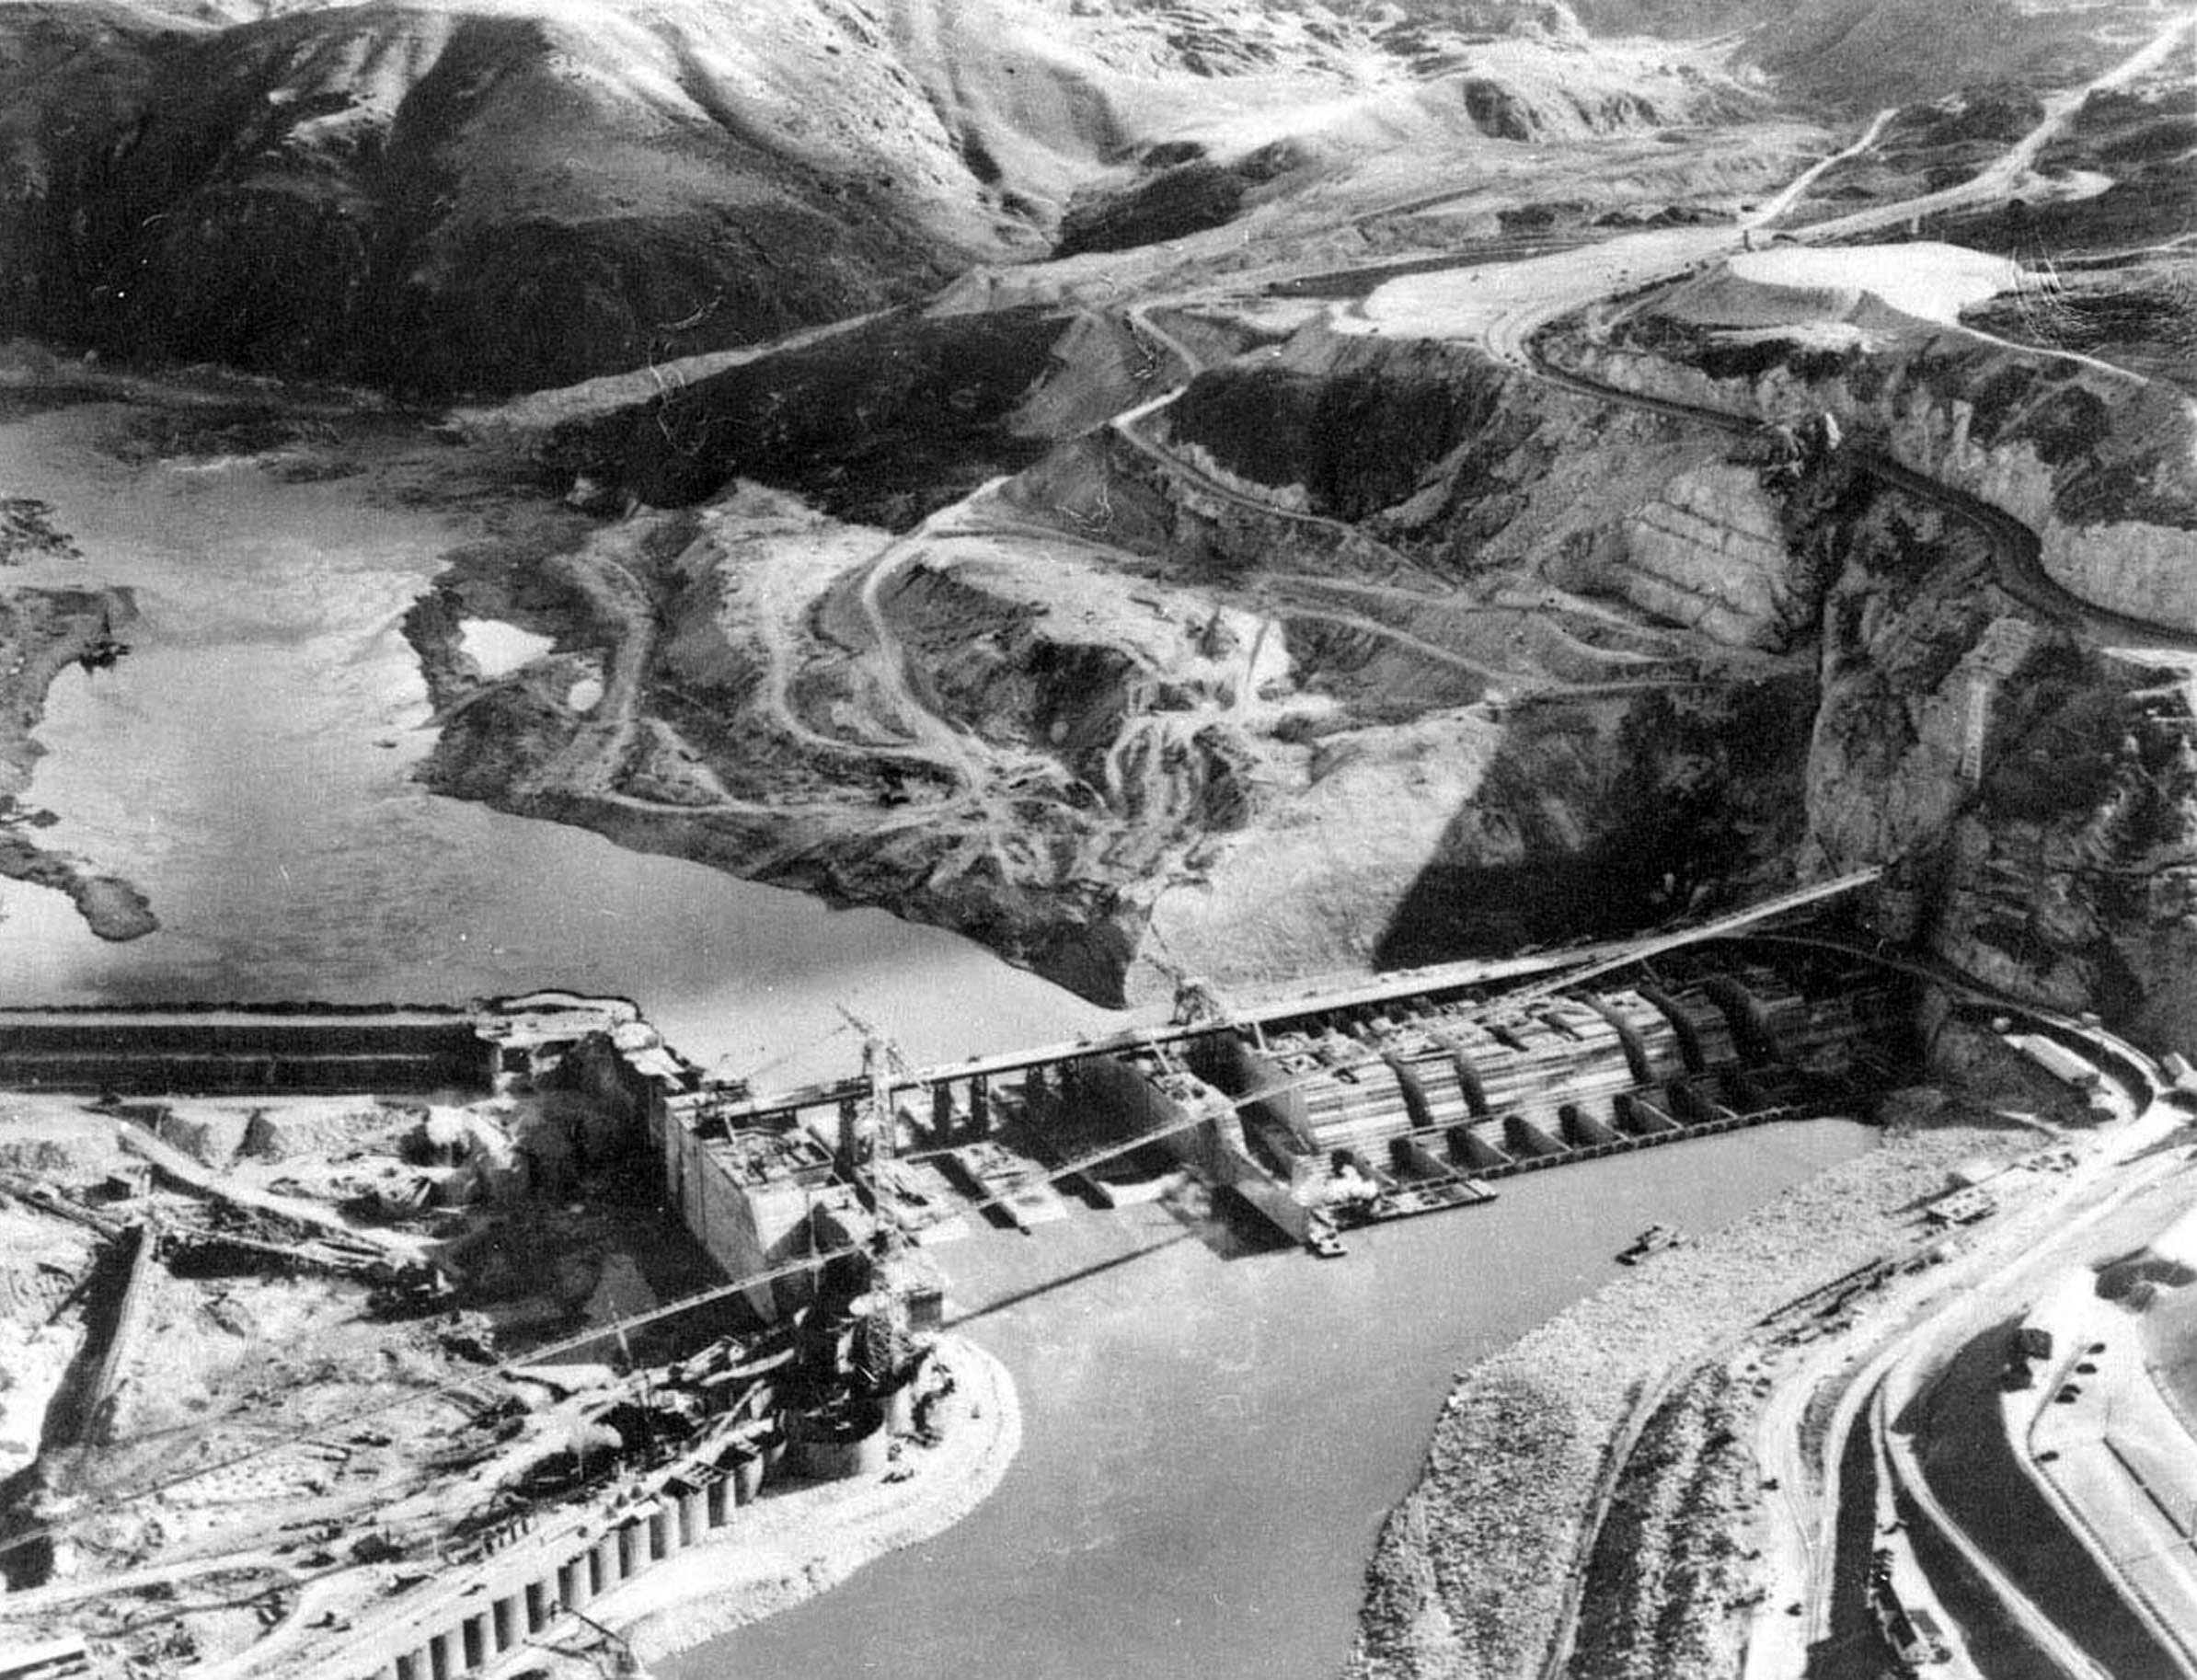 Circa 1936. East side cofferdam on left with diversion channel center and Grand Coulee Dam foundation taking shape center.